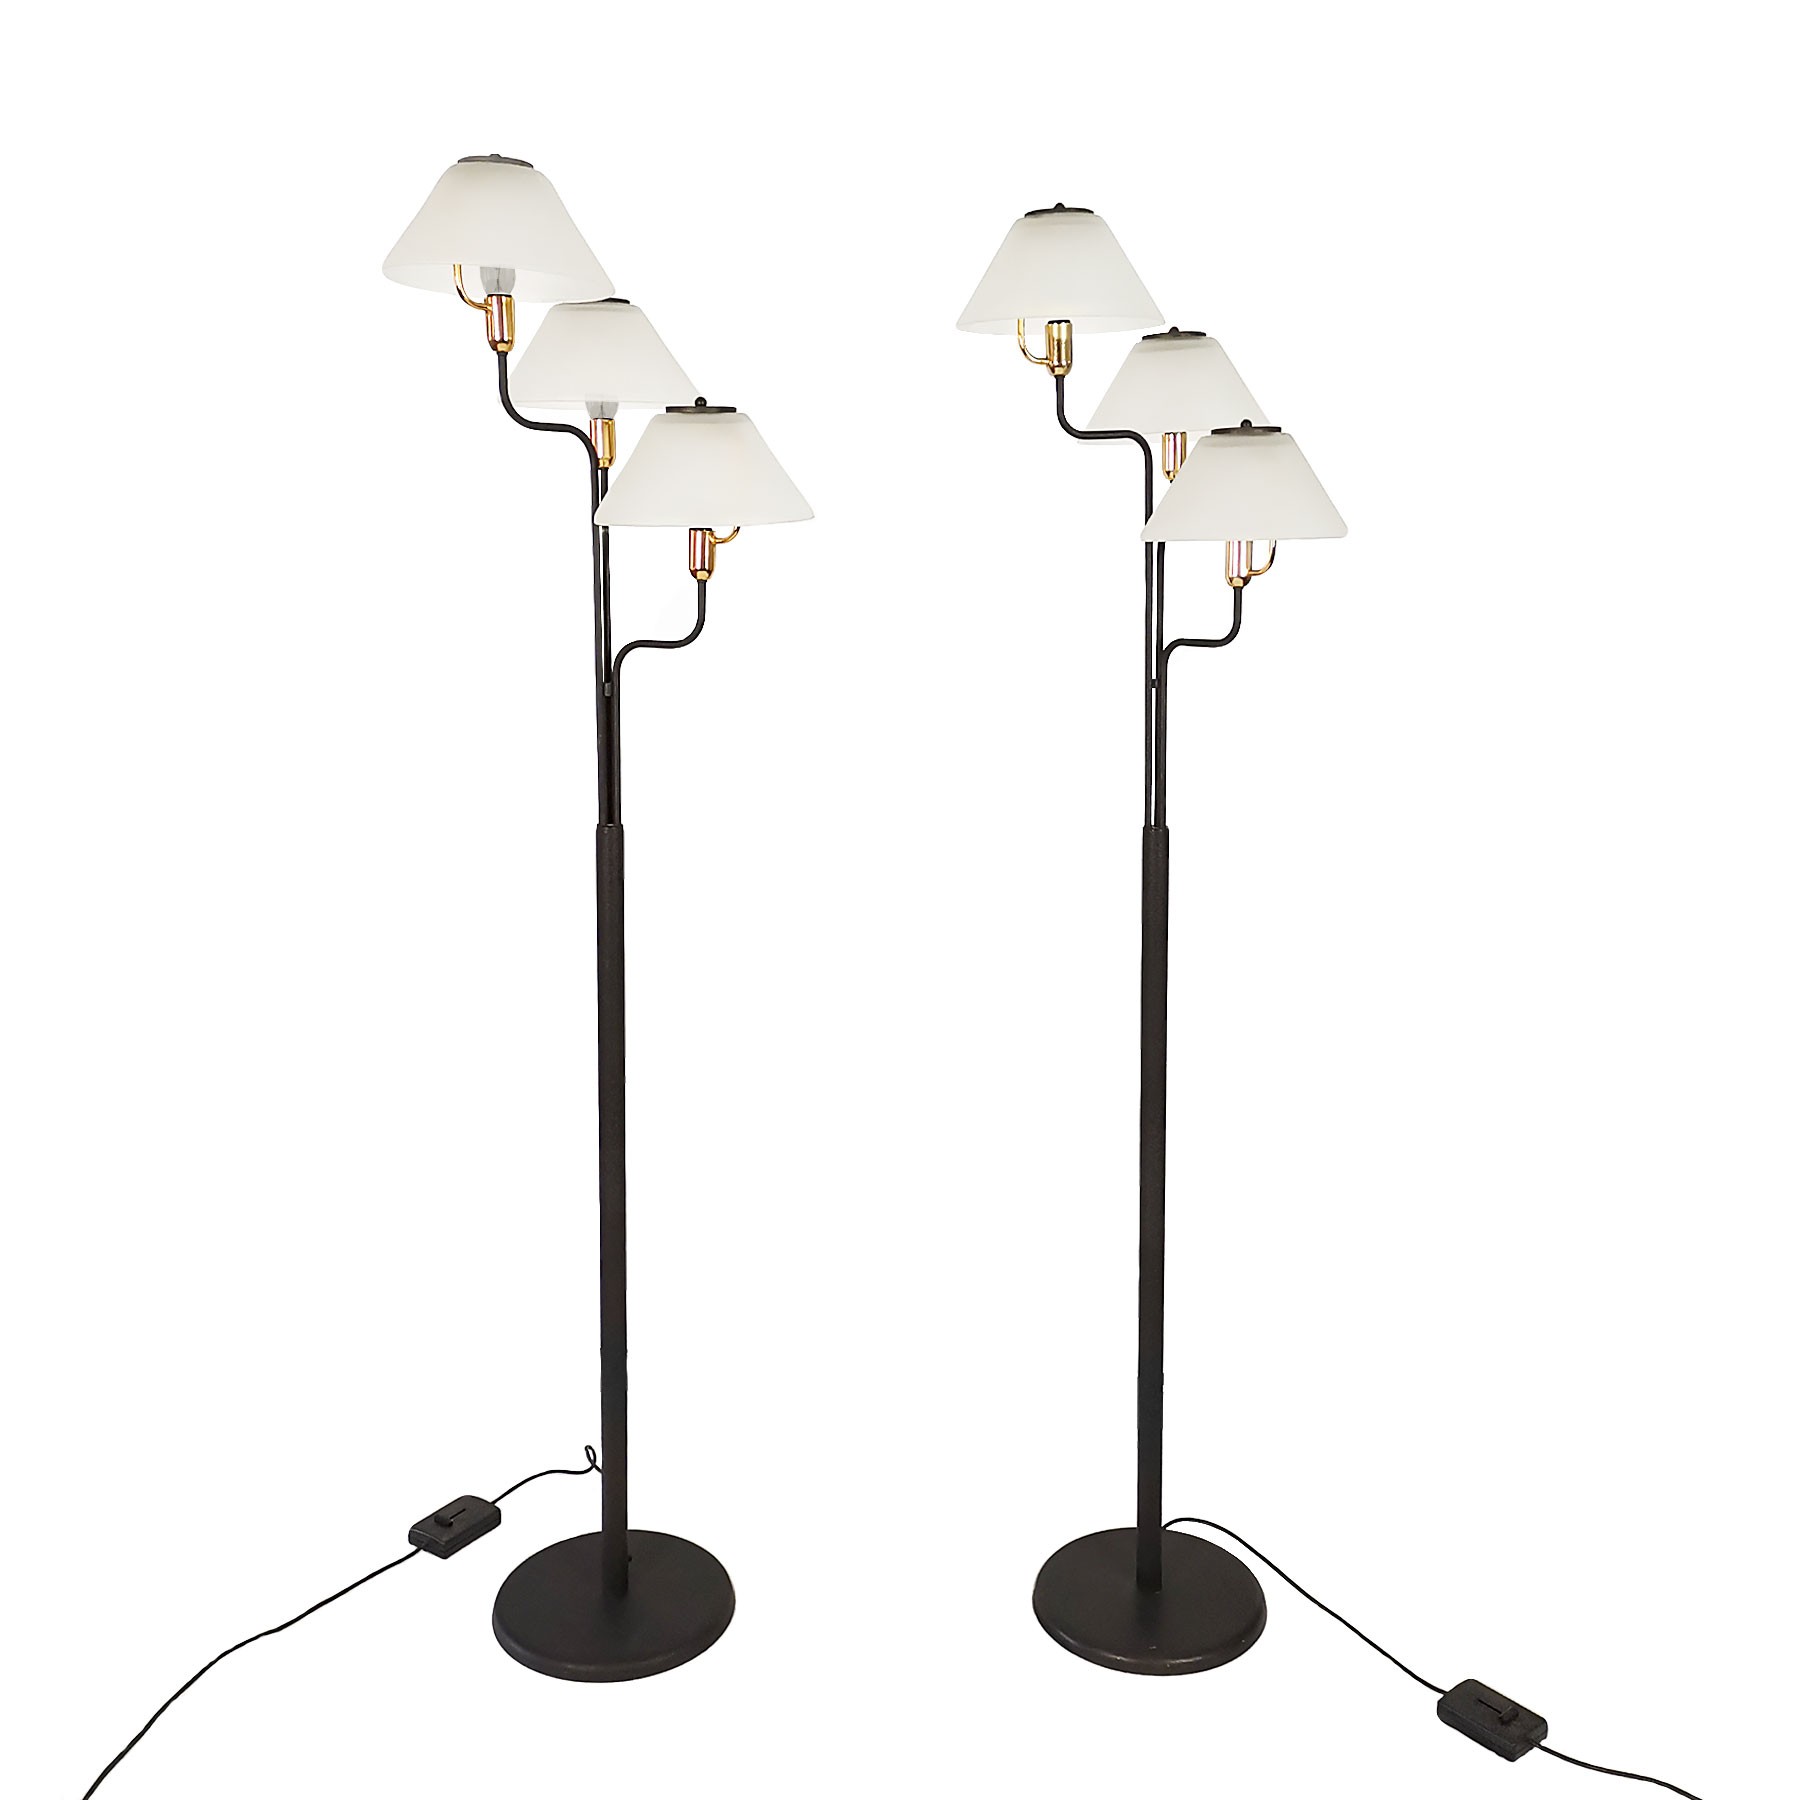 standing lamps